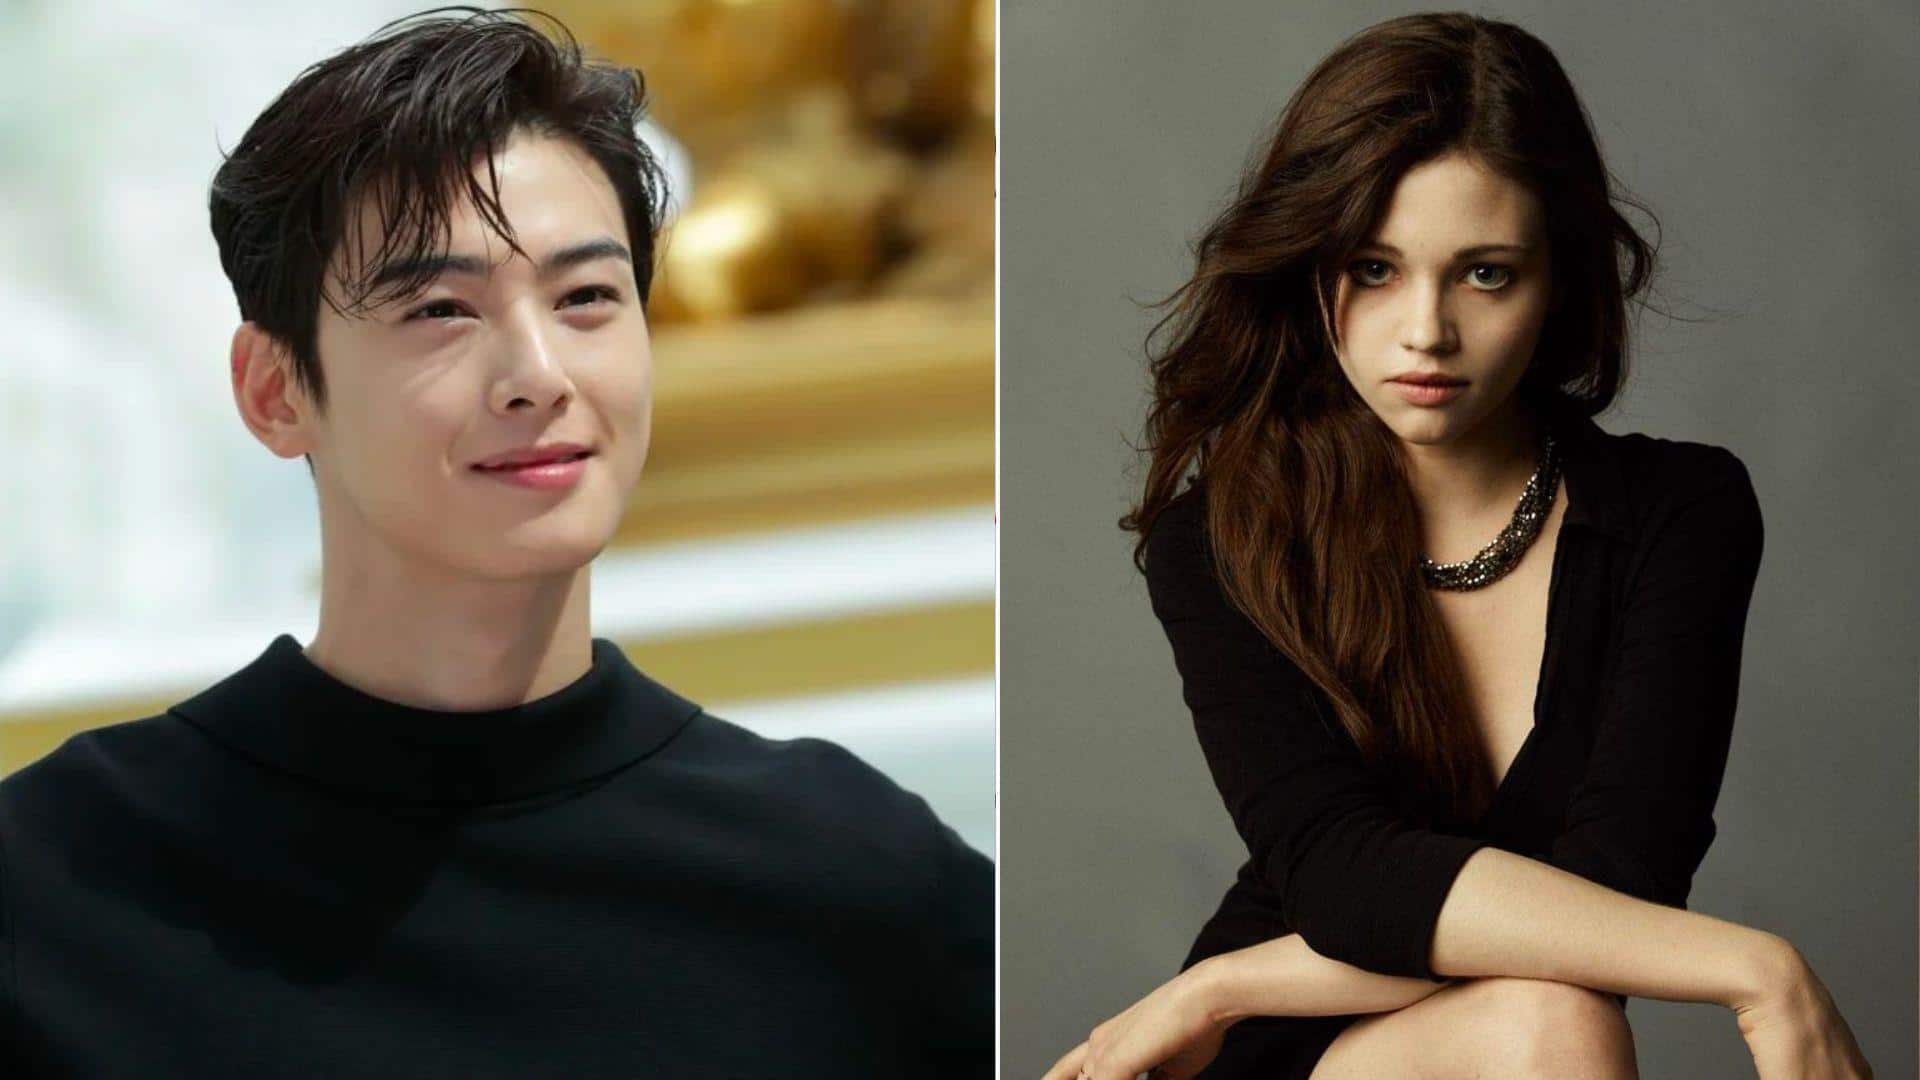 ASTRO's Cha Eun-woo dating actor India Eisley? What we know